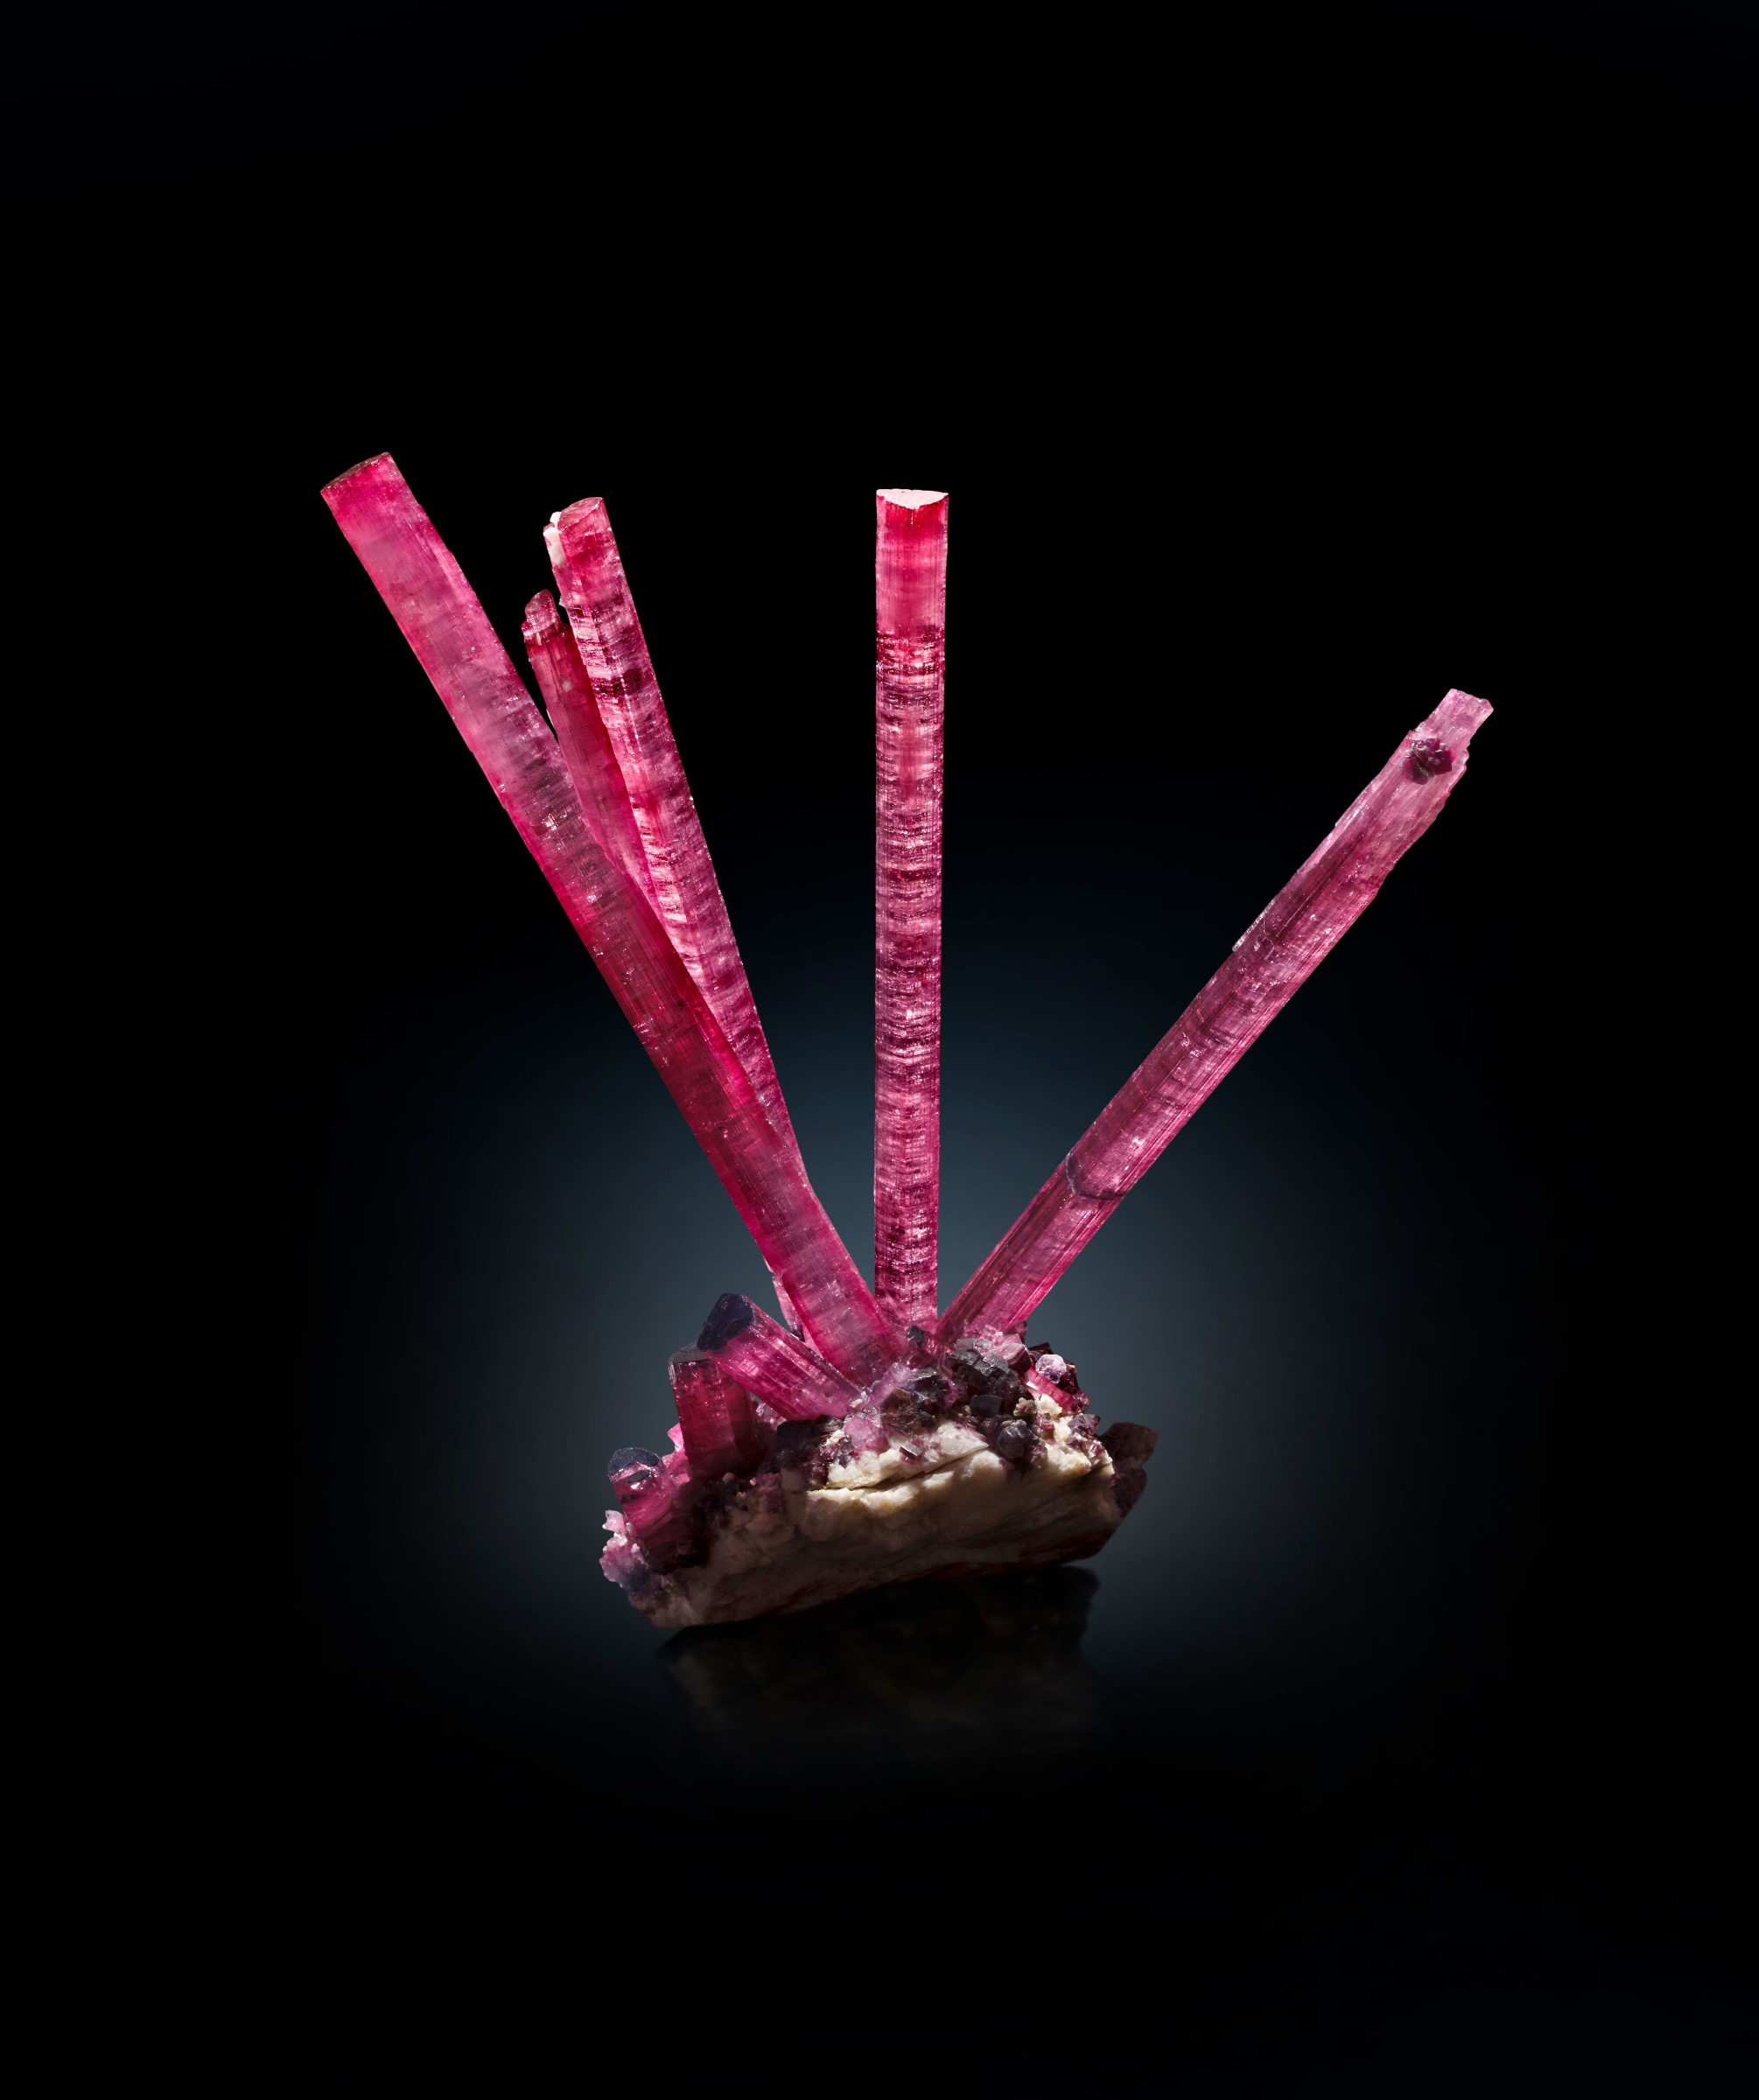 Tourmaline var. Rubellite &amp;ldquo;The Cranberry Crown&amp;rdquo;, Pederneira Mine, S&amp;atilde;o Jos&amp;eacute; da Safira, Minas Gerais, Brazil

Tourmaline is one of the very few minerals for which restoration/repair/reconstruction is considered to be not only acceptable, but wholly appropriate. This is because the pegmatite cavities in which the minerals grew almost inevitably collapsed in the course of geological time, thereby naturally breaking these delicate, wand-like crystals. For pieces such as this, many hours of painstaking piecing together of a three-dimensional jigsaw results in an end-product looking just as Mother Nature intended.